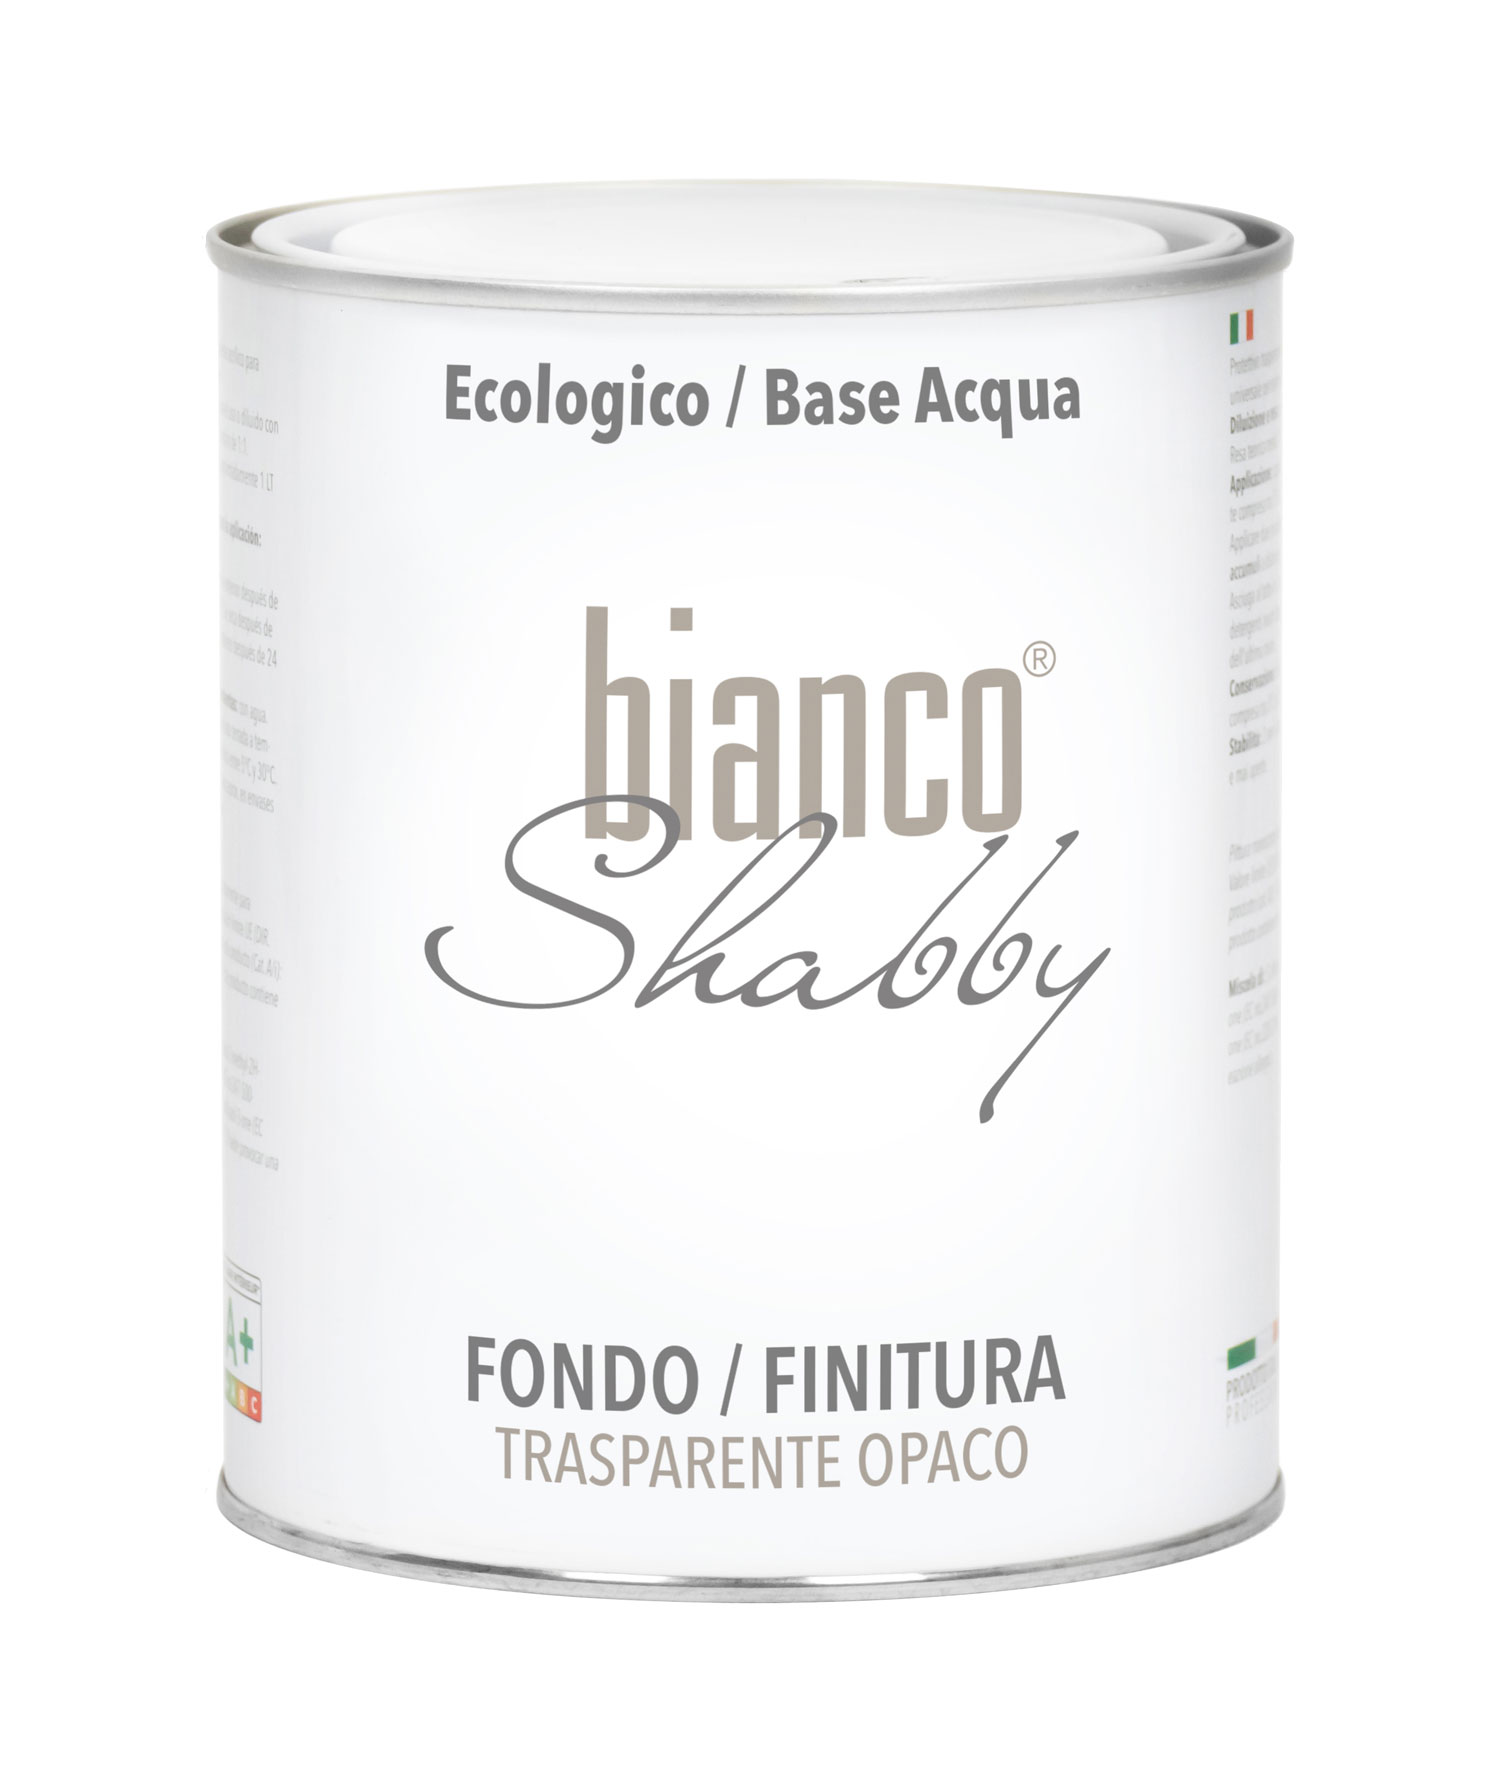 bianco Shabby® Beige Corda Water-based chalk paint for all